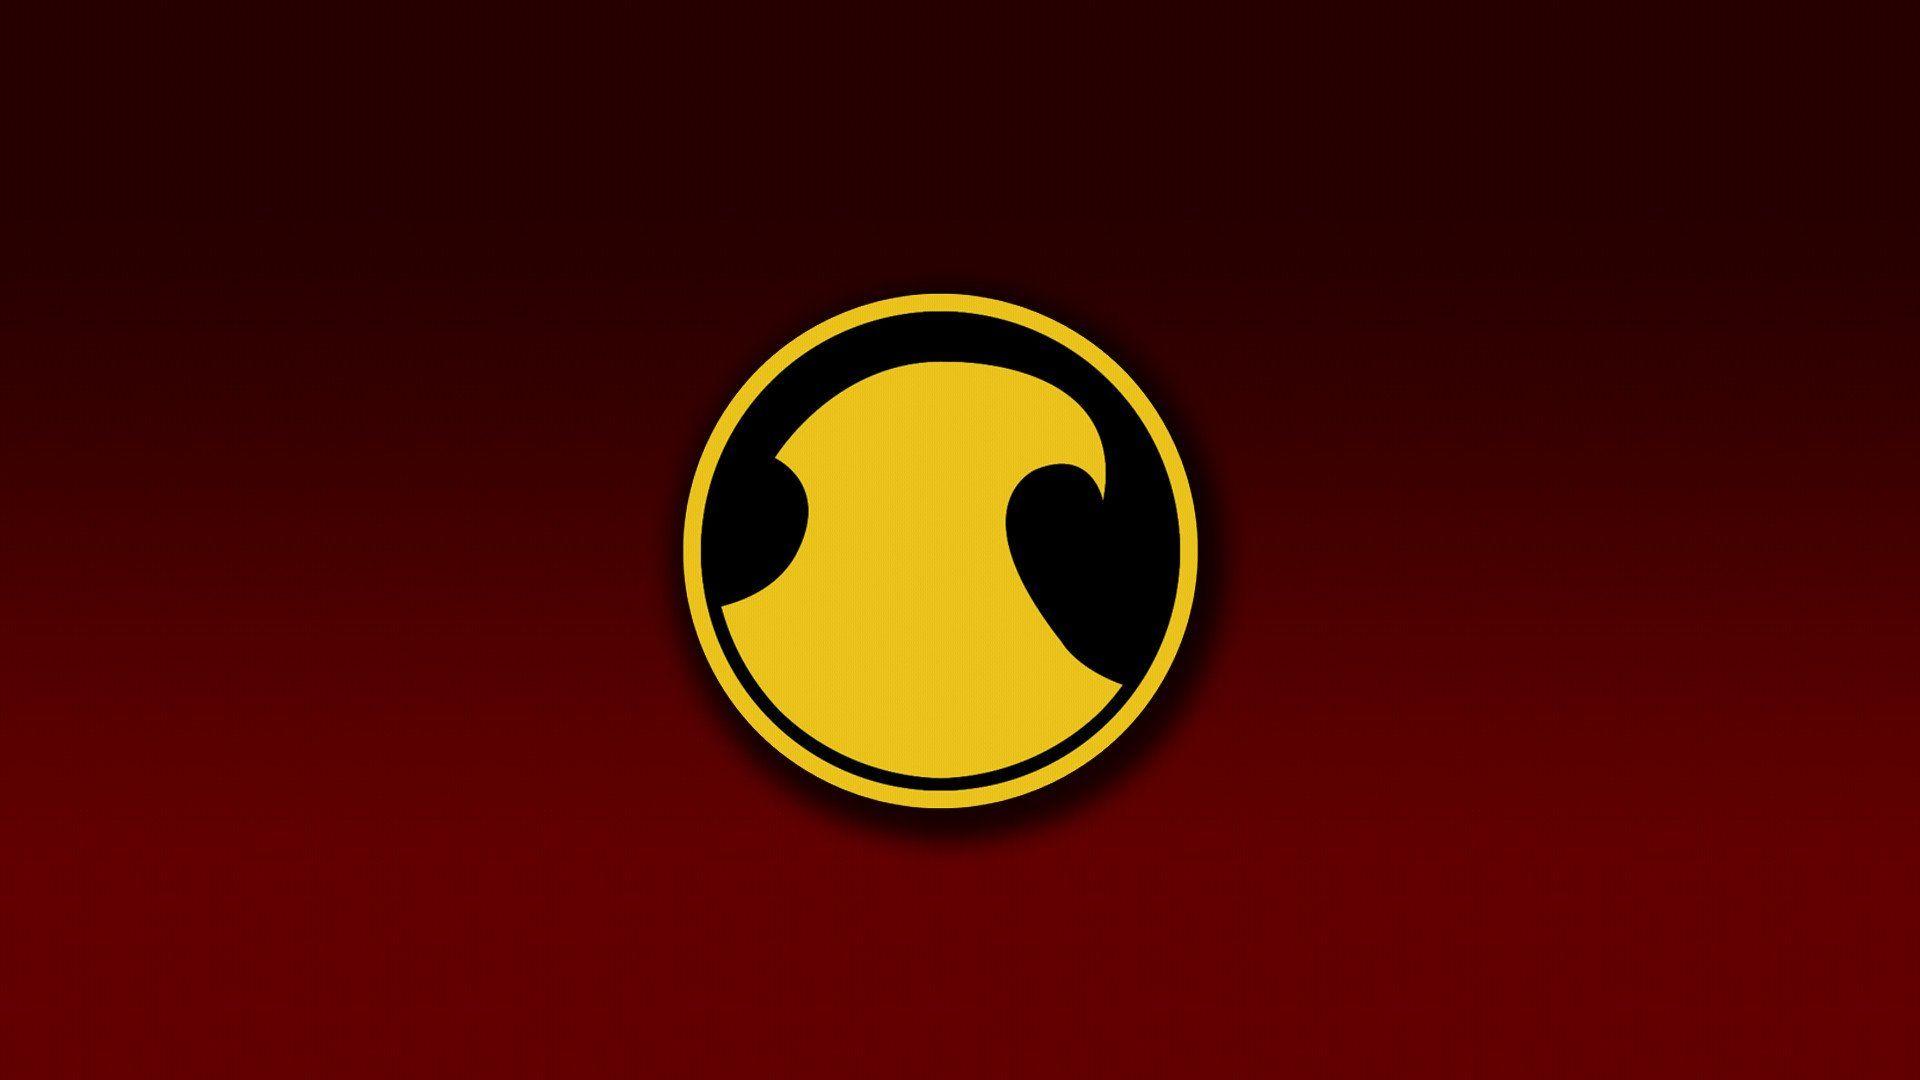 Red Robin DC Logo - Red Robin Wallpapers - Wallpaper Cave